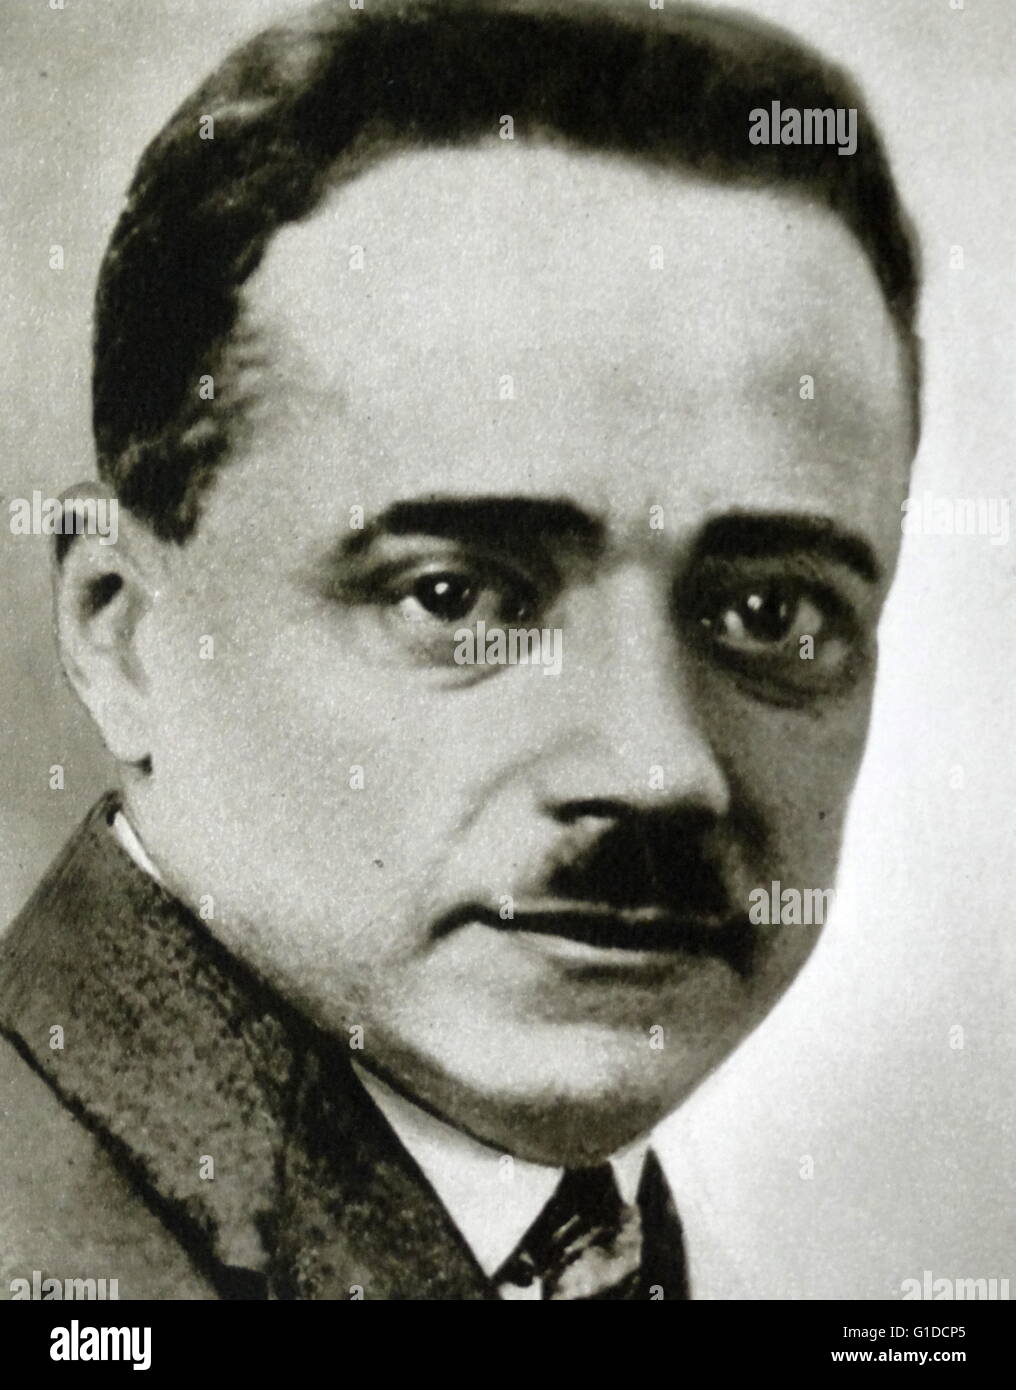 Engelbert Dollfuss (1892 –1934) Austrian statesman.  Federal Chancellor in 1932 in the midst of a crisis for the conservative government.  Dollfuss was assassinated as part of a failed coup attempt by Nazi agents in 1934. Stock Photo